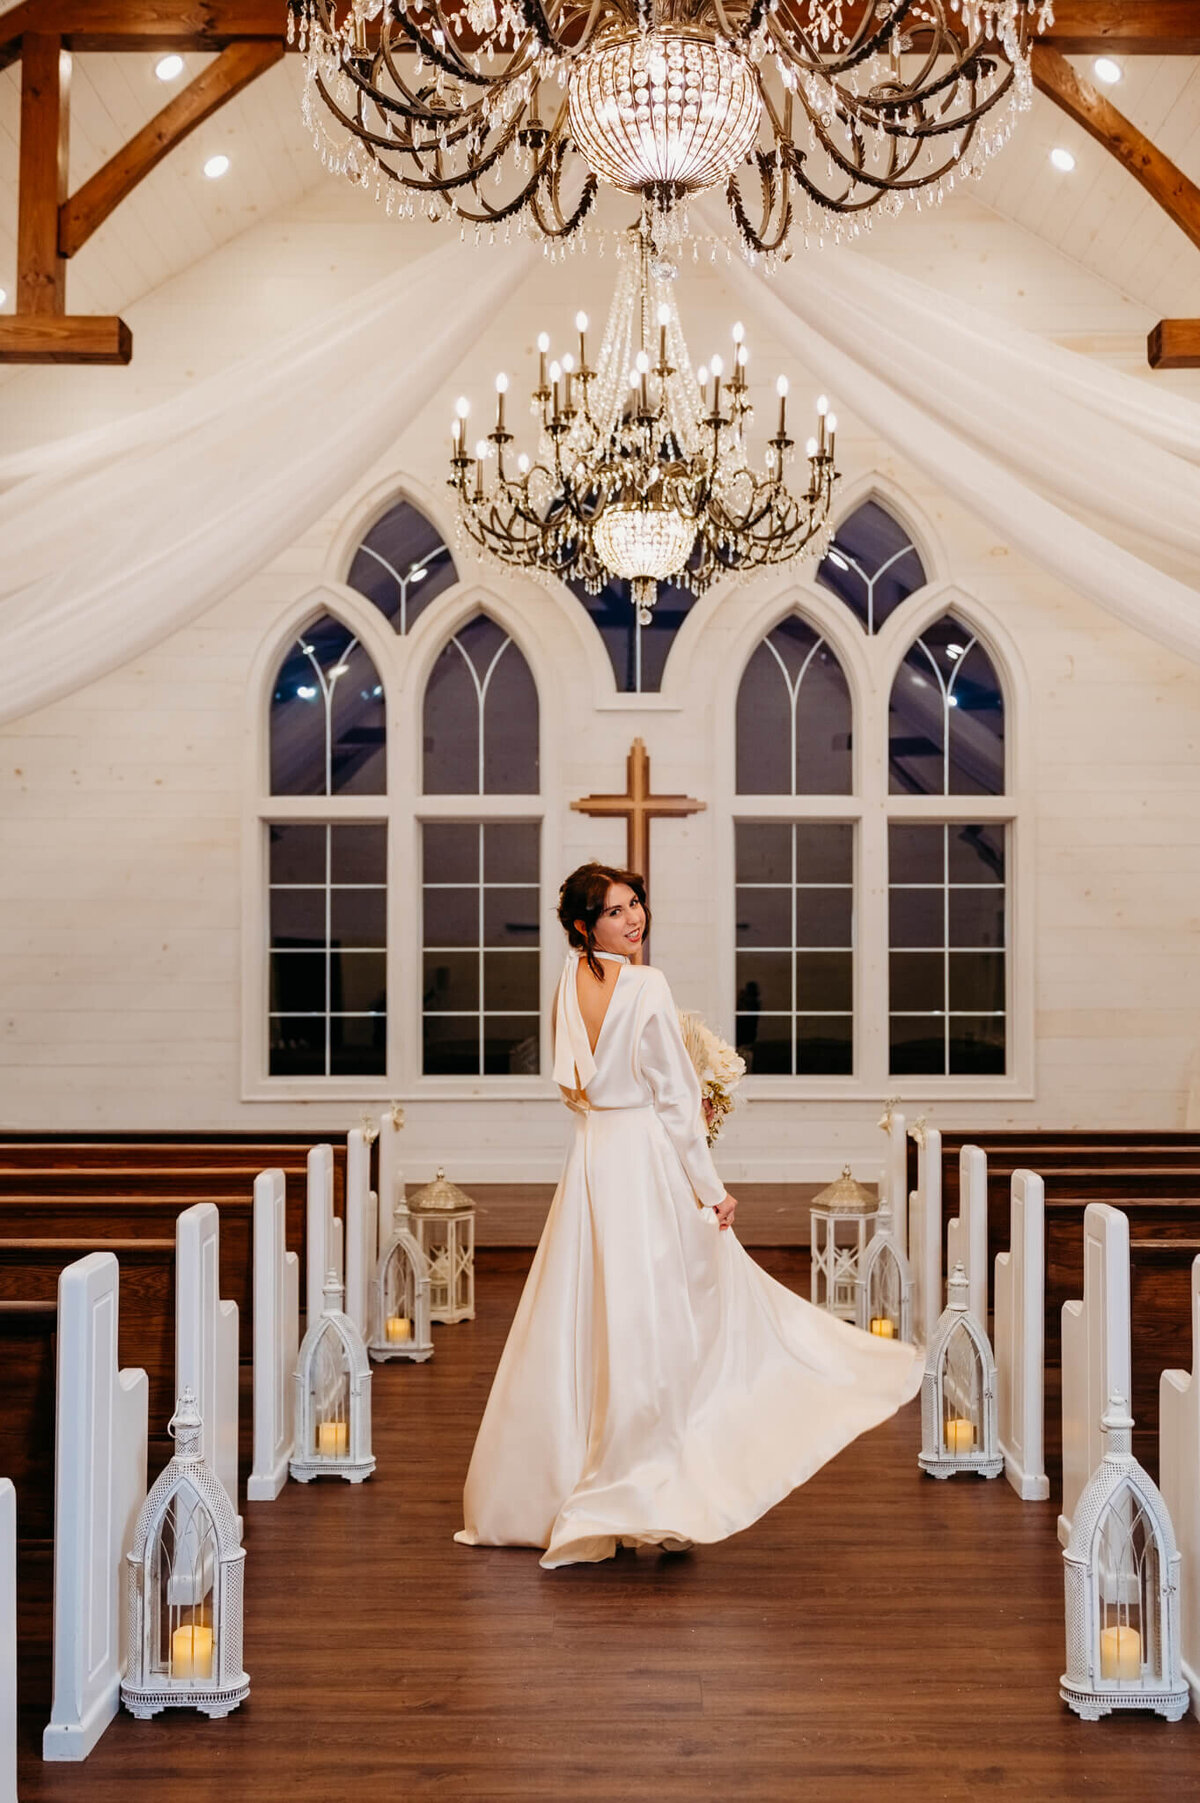 The bride spinning her dress inside of a chapel chandeliers